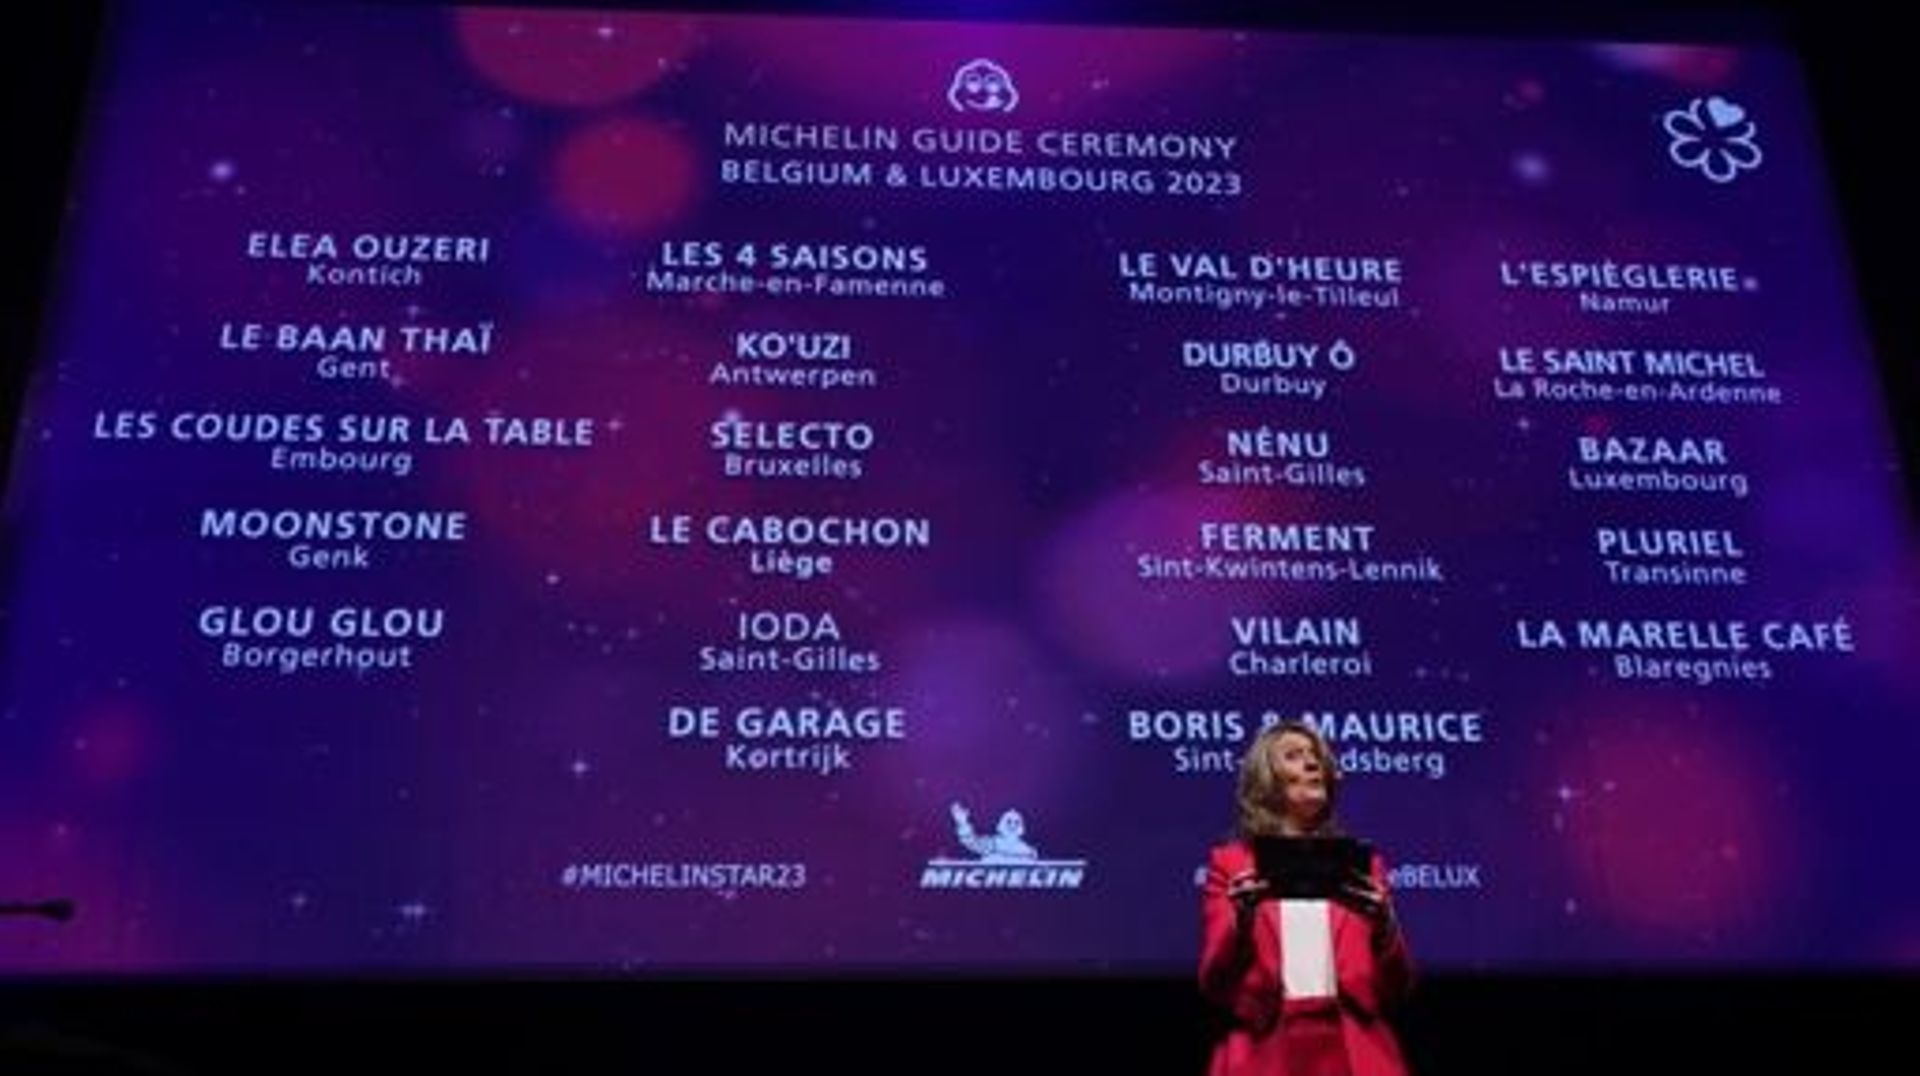 The list of Michelin Green Star restuarants pictured during the presentation of the new edition of the Michelin 2023 restaurant and hotel guide for Belgium and Luxembourg, in Mons, Monday 13 March 2023. BELGA PHOTO BENOIT DOPPAGNE